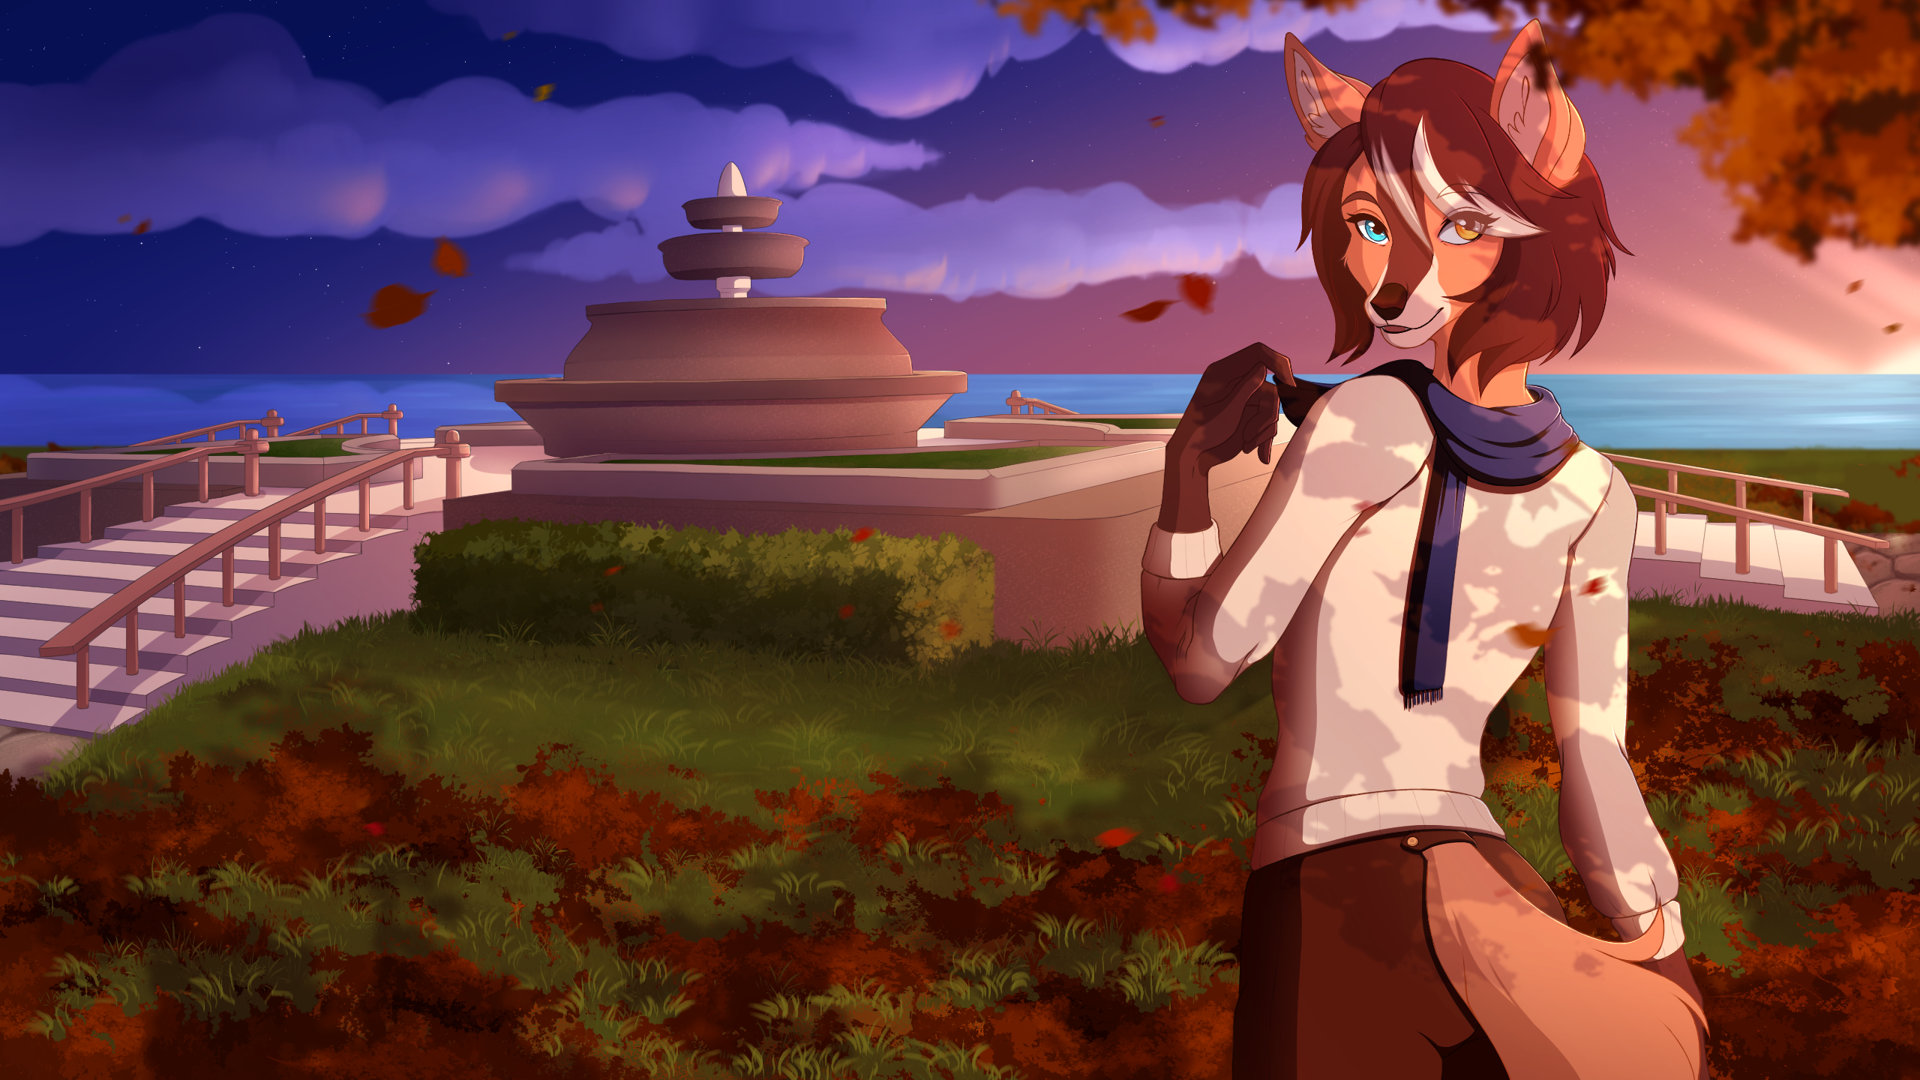 2022 Fall - Fluffyre - Clothed - 1920x1080.png